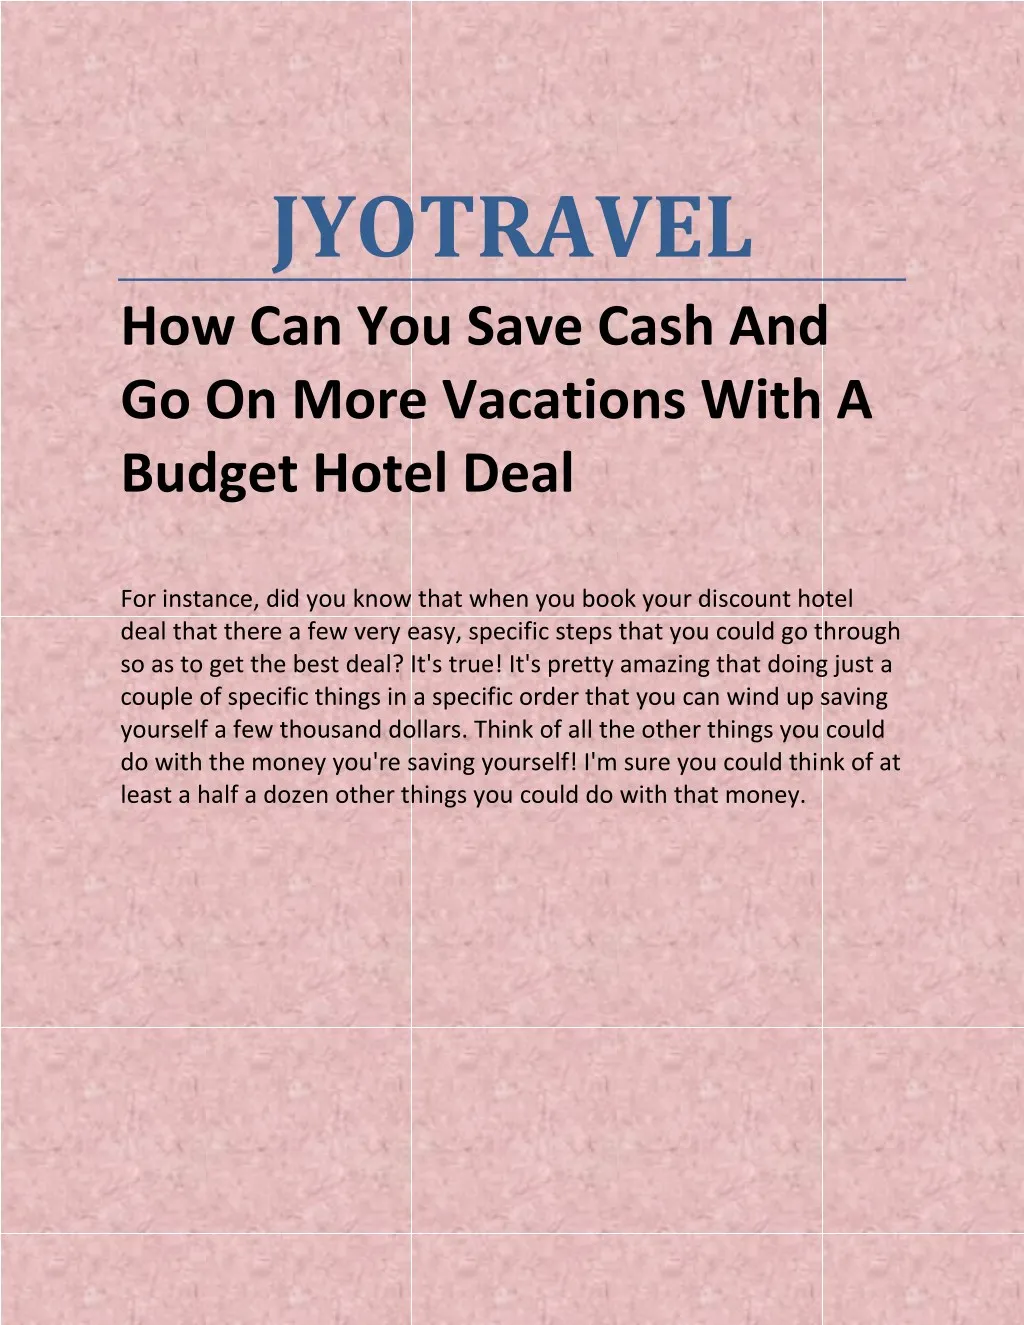 jyotravel how can you save cash and go on more